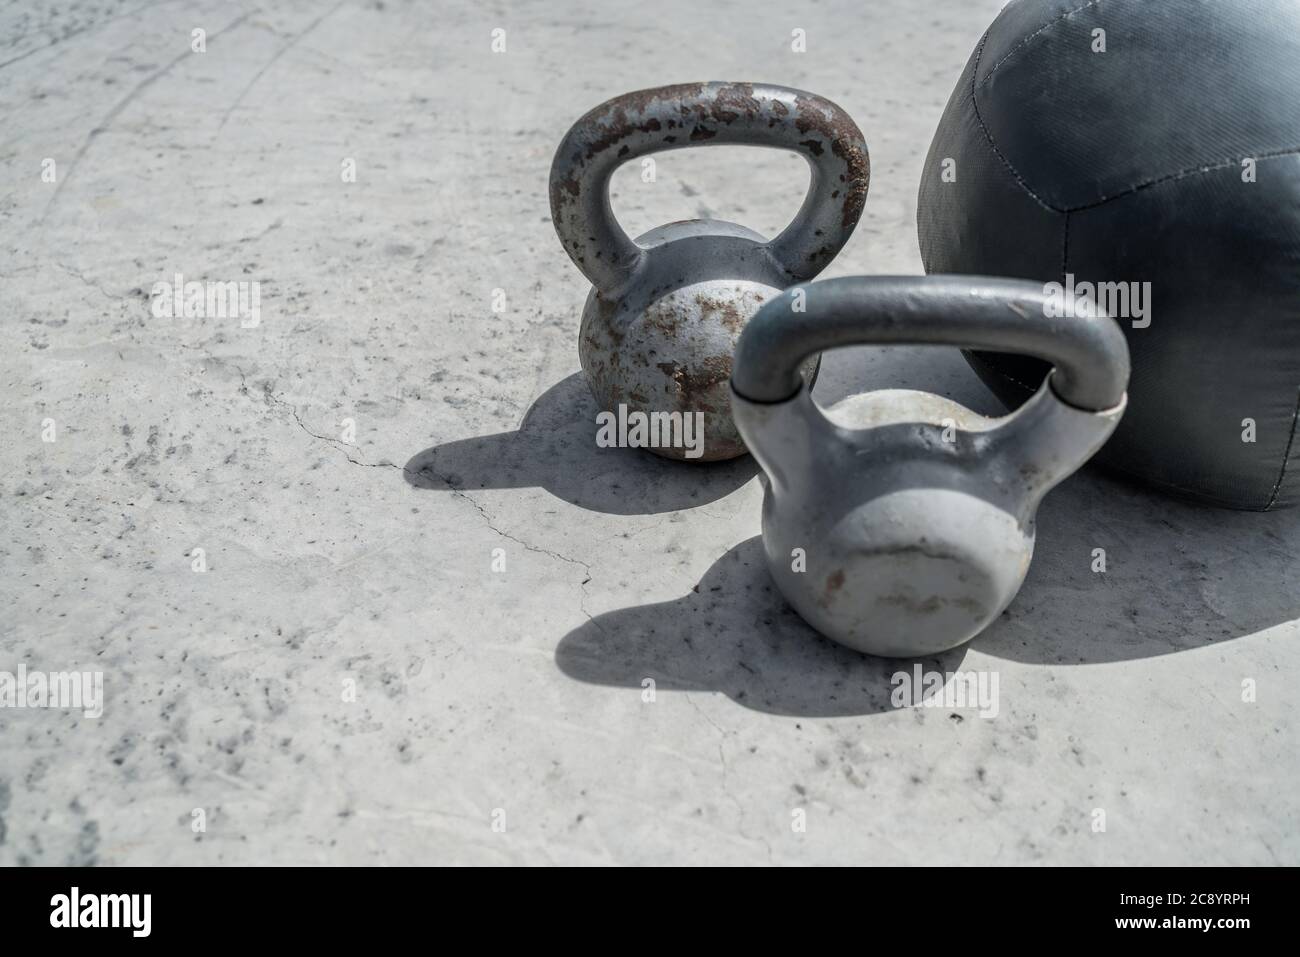 Gym kettlebell weights and medicine ball Stock Photo - Alamy